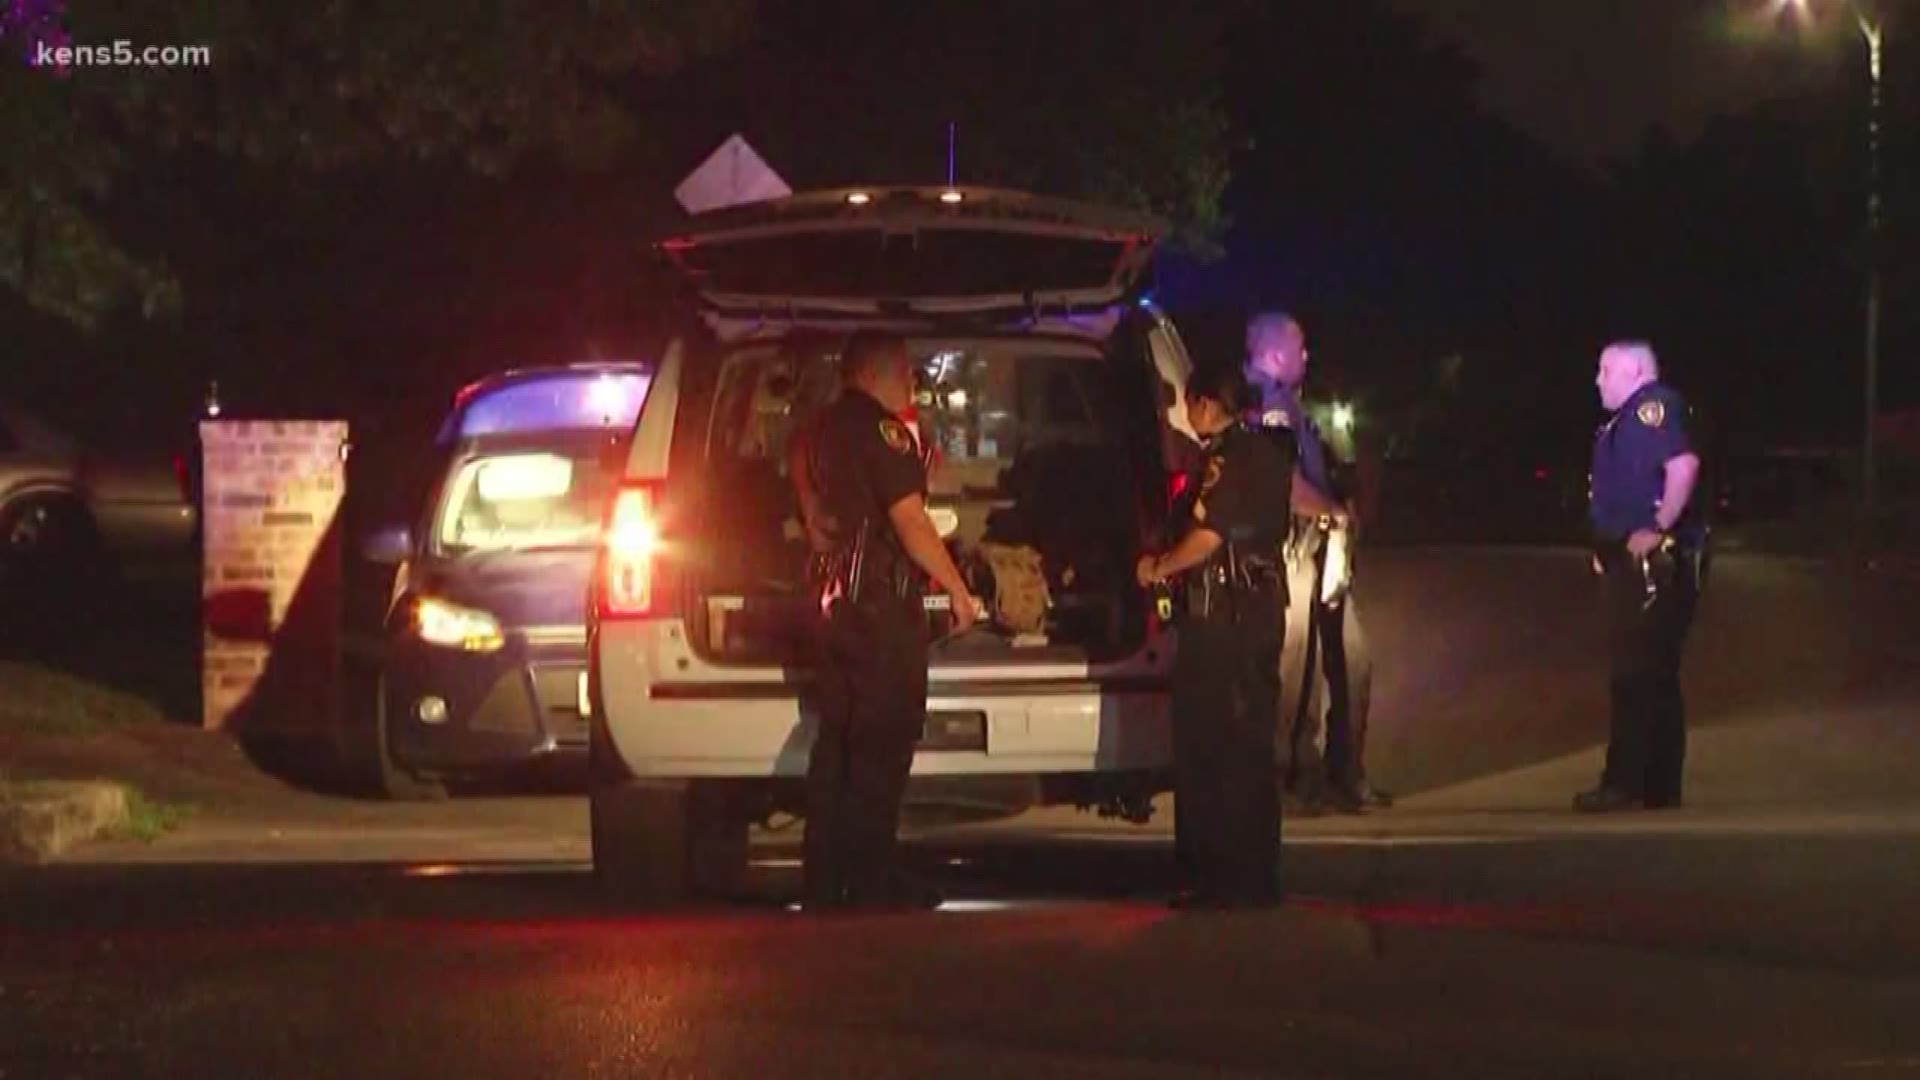 According to police, the car the suspects were in was stolen. The car reached speeds of up to 68 mph in the residential area of Bear Creek Drive and Saddlebrook Drive on the city's west side.